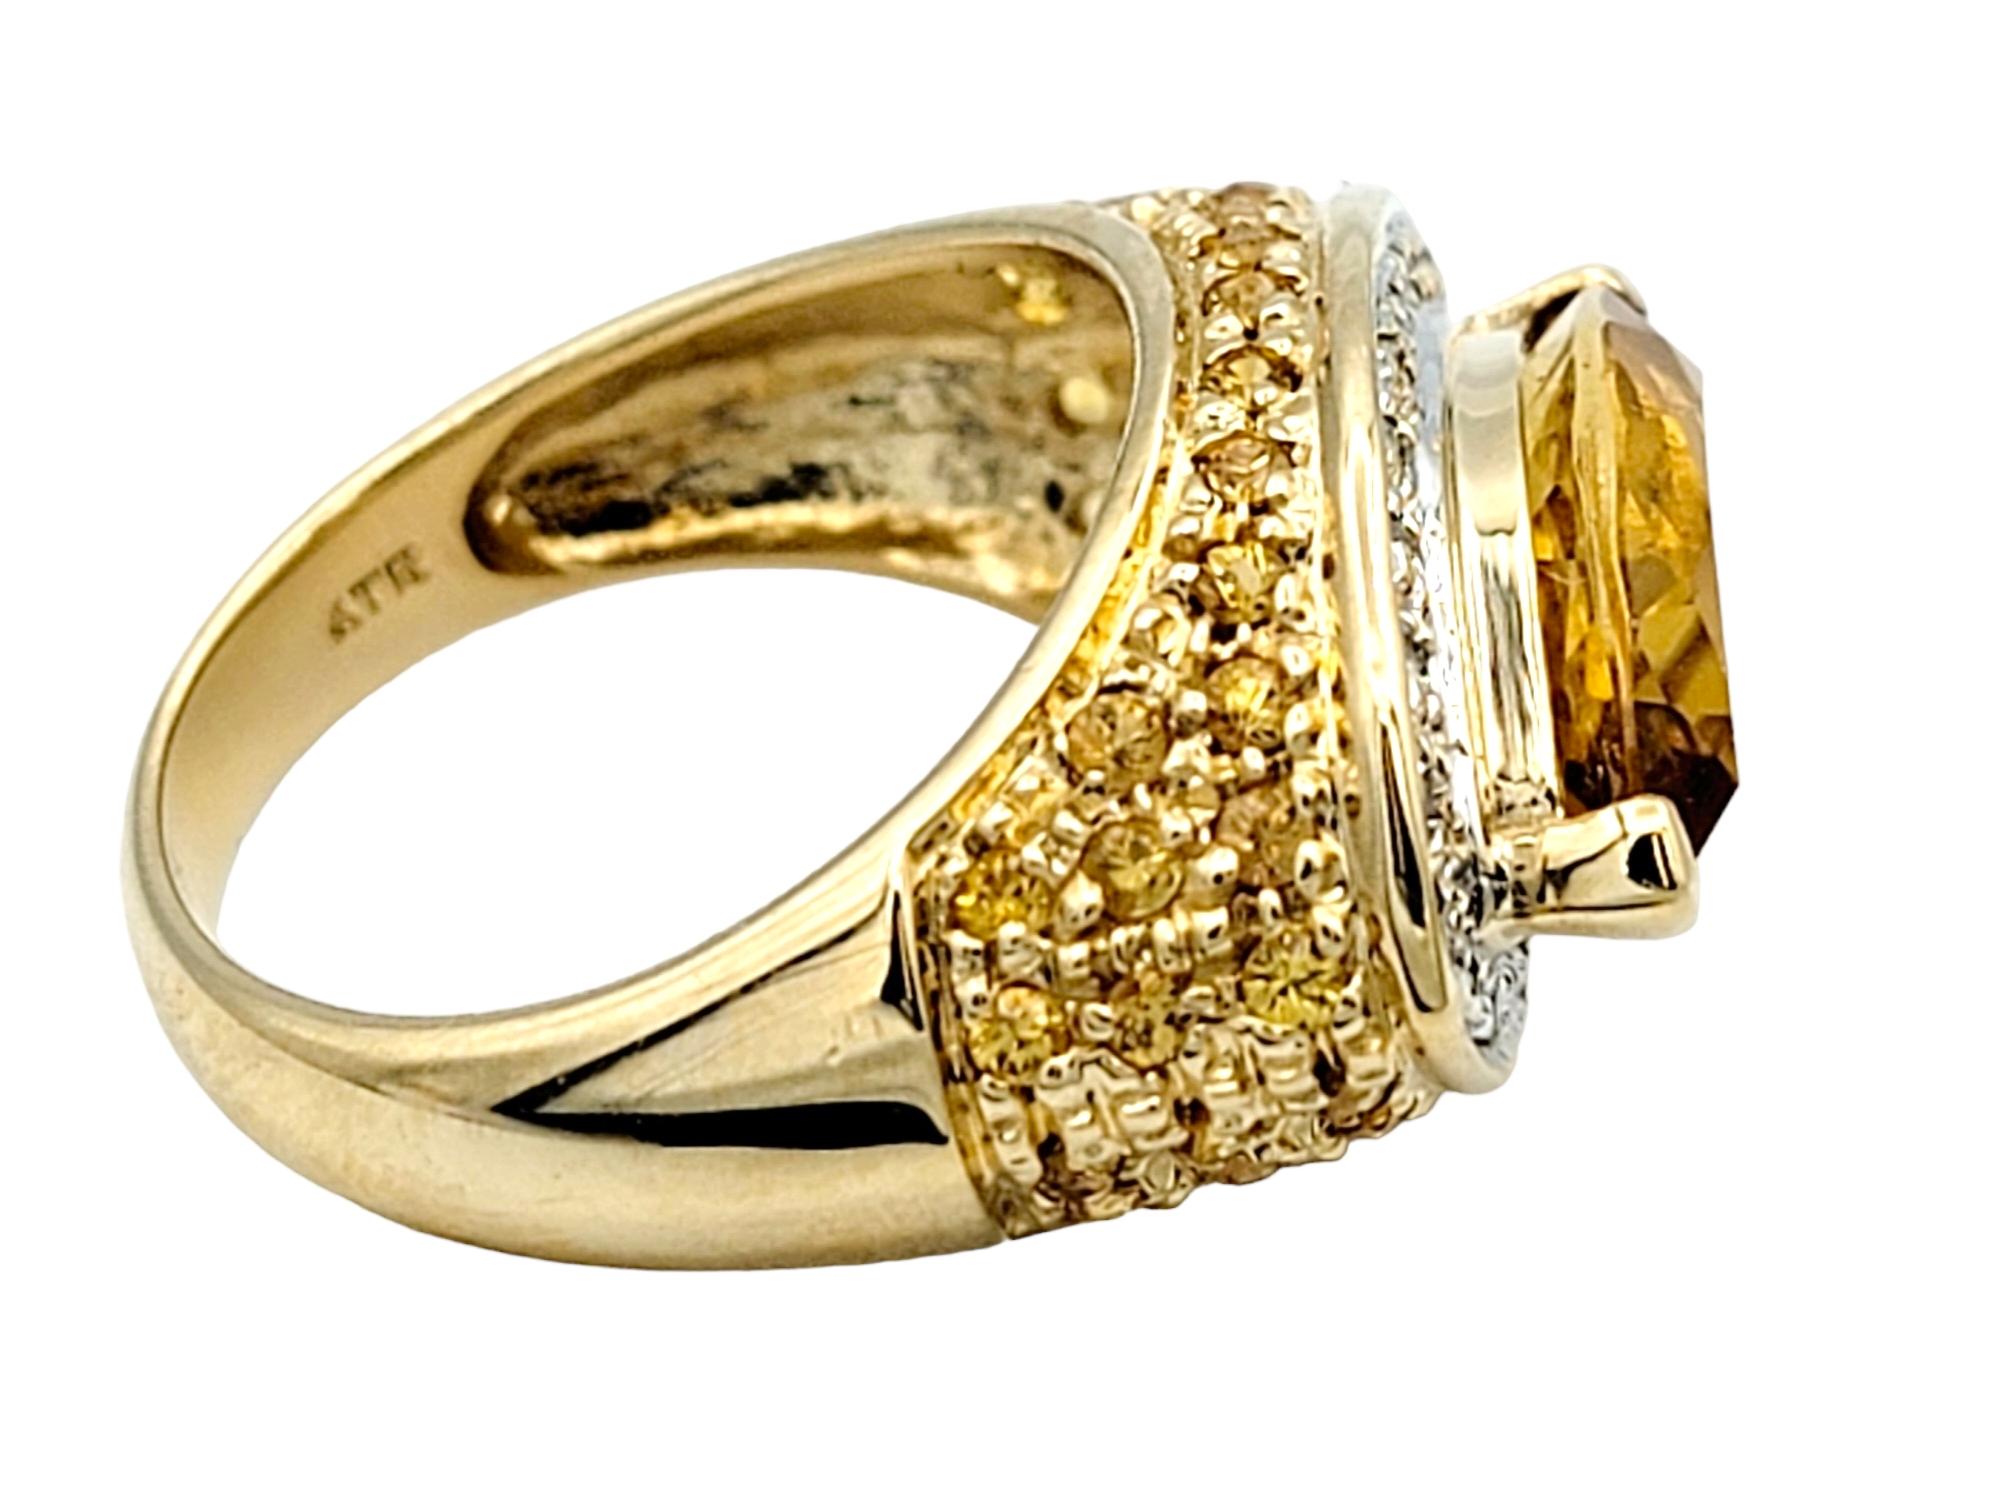 Marquis Cut Citrine Ring with Diamond and Yellow Sapphire Accents 14 Karat Gold  In Good Condition For Sale In Scottsdale, AZ